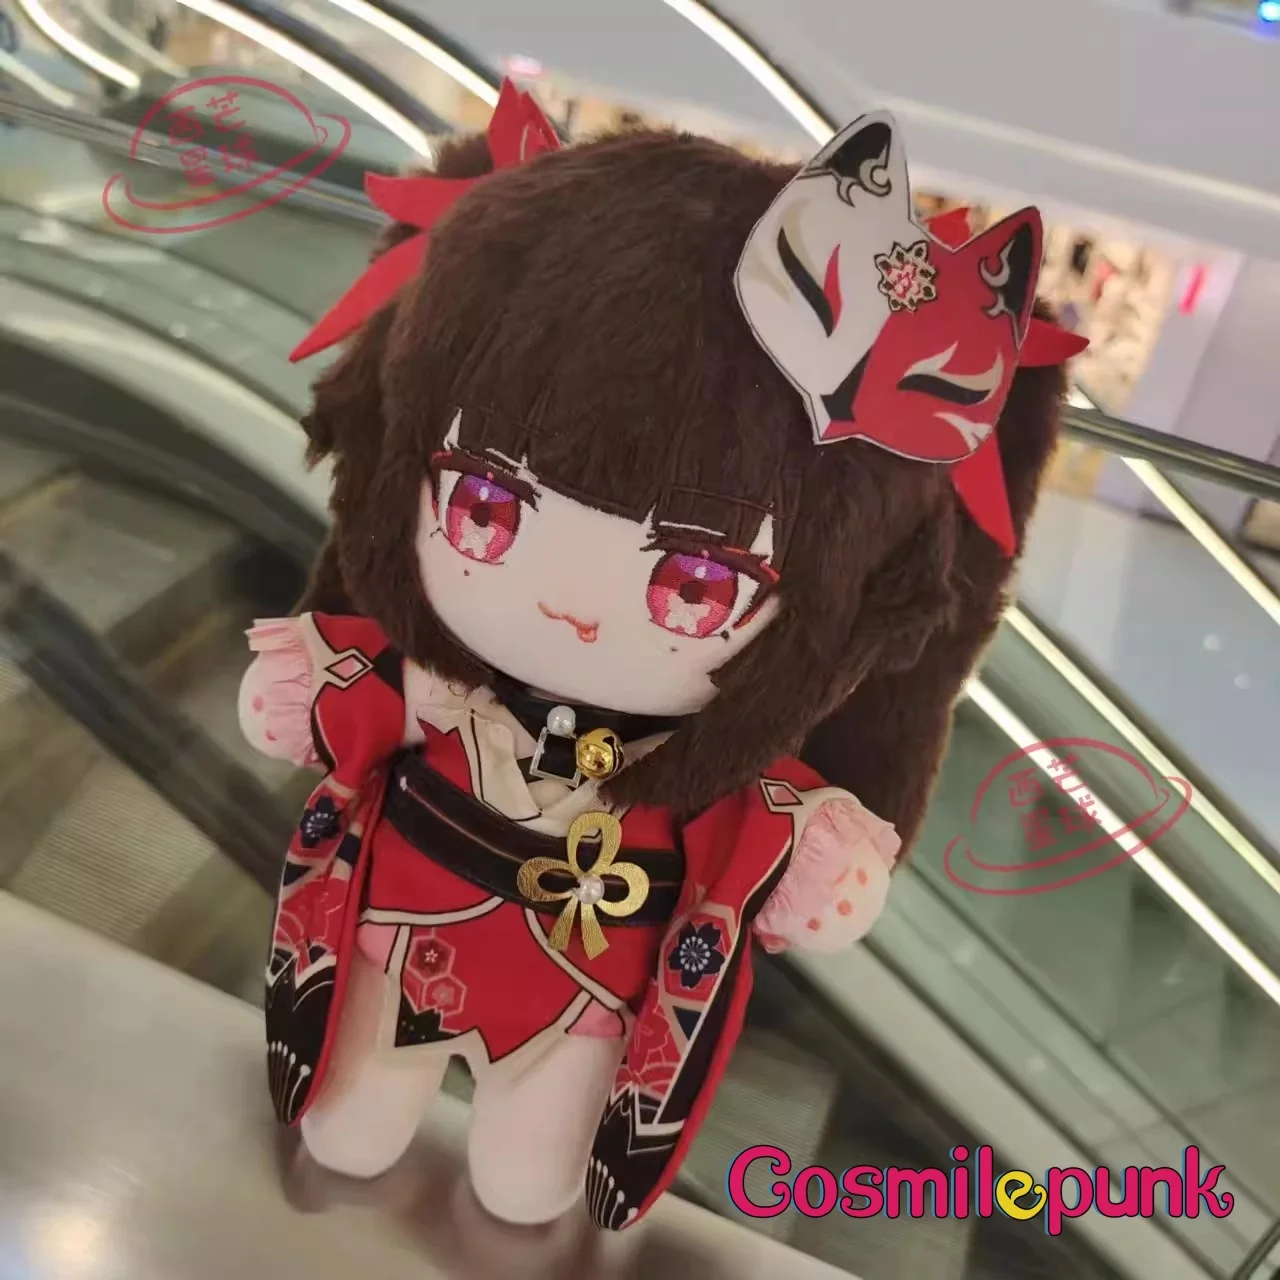 new-game-honkai-star-rail-sparkle-20cm-plush-doll-body-change-clothes-outfit-toy-cosplay-fan-gift-xm-pre-order